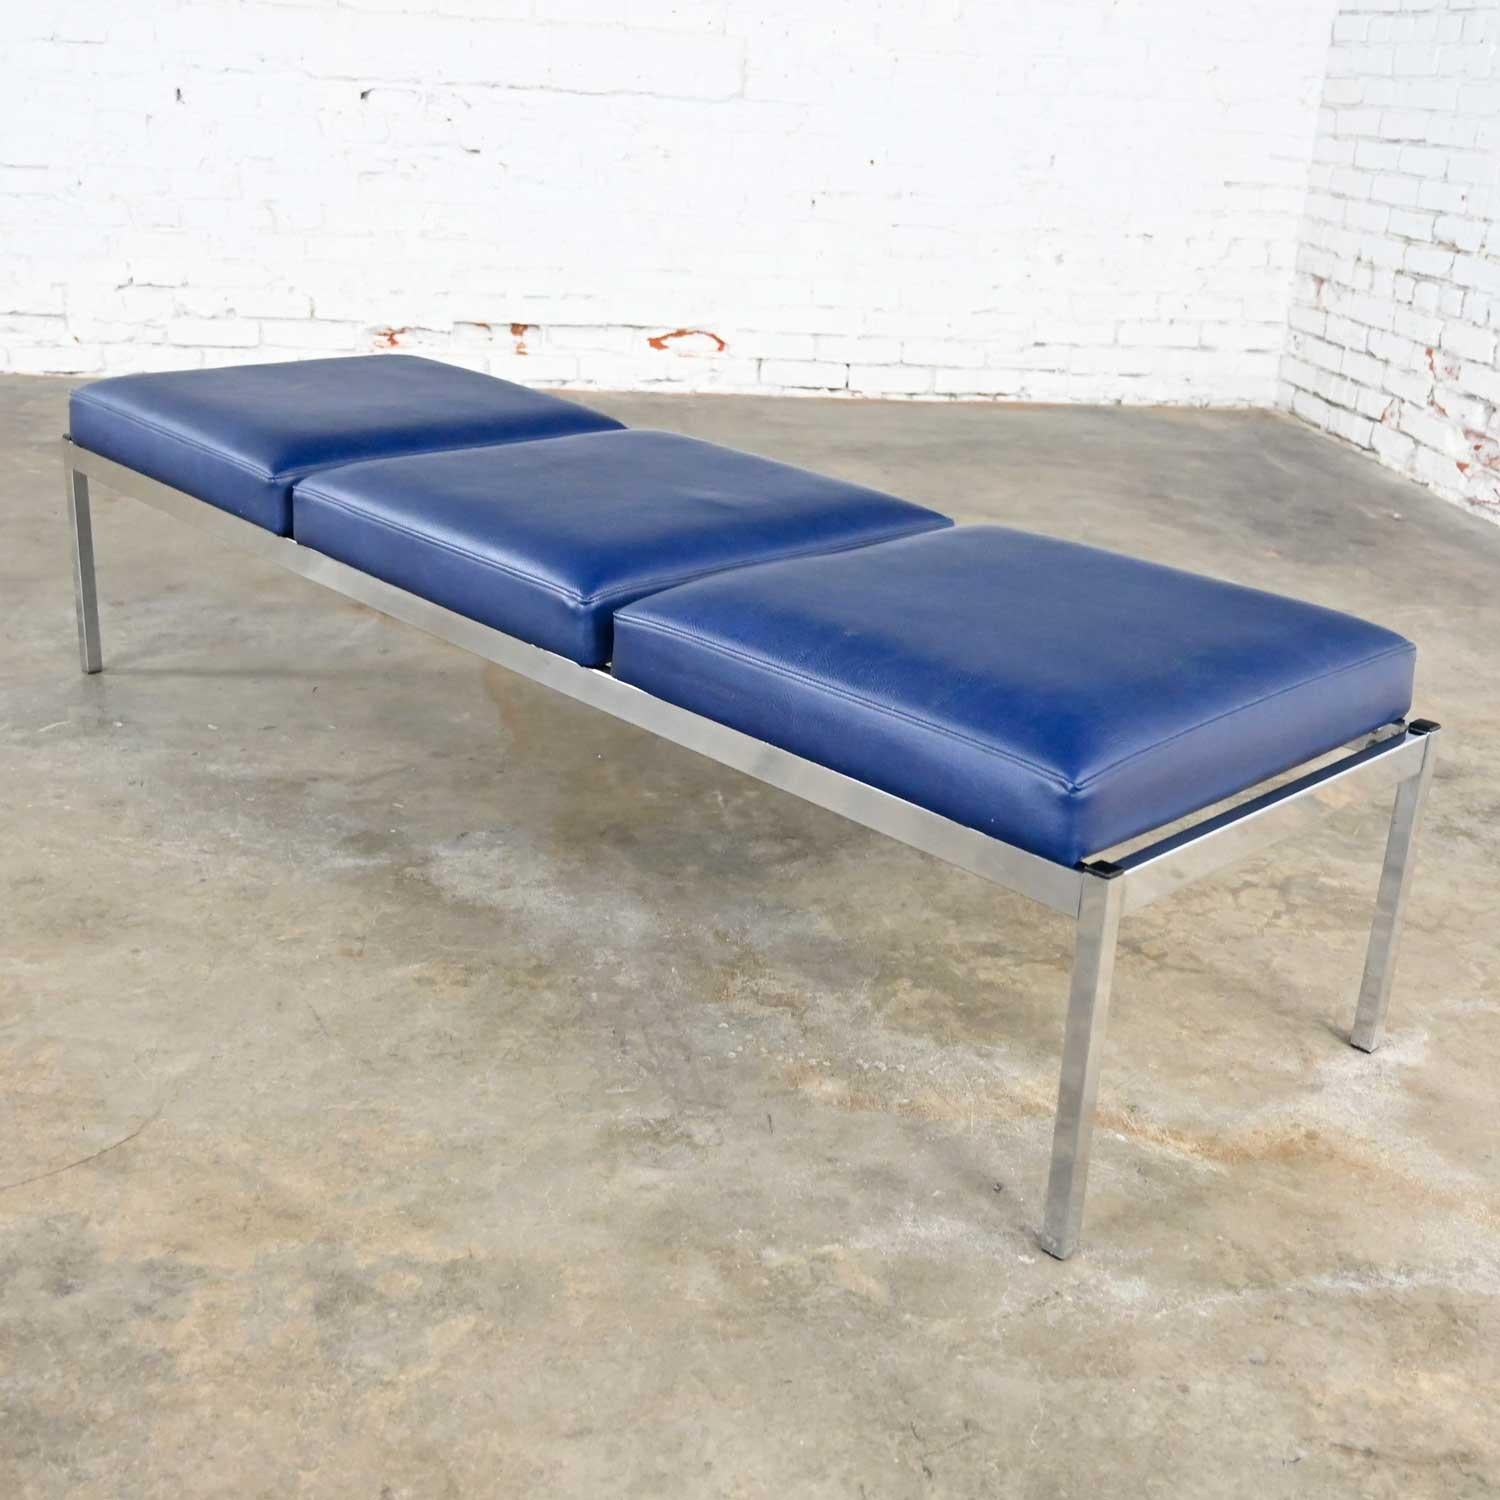 Awesome Mid-Century Modern royal blue vinyl or faux leather and chrome three cushion bench by Globe Business Furniture in the style of Steelcase. Wonderful condition, keeping in mind that this is vintage and not new so will have signs of use. We